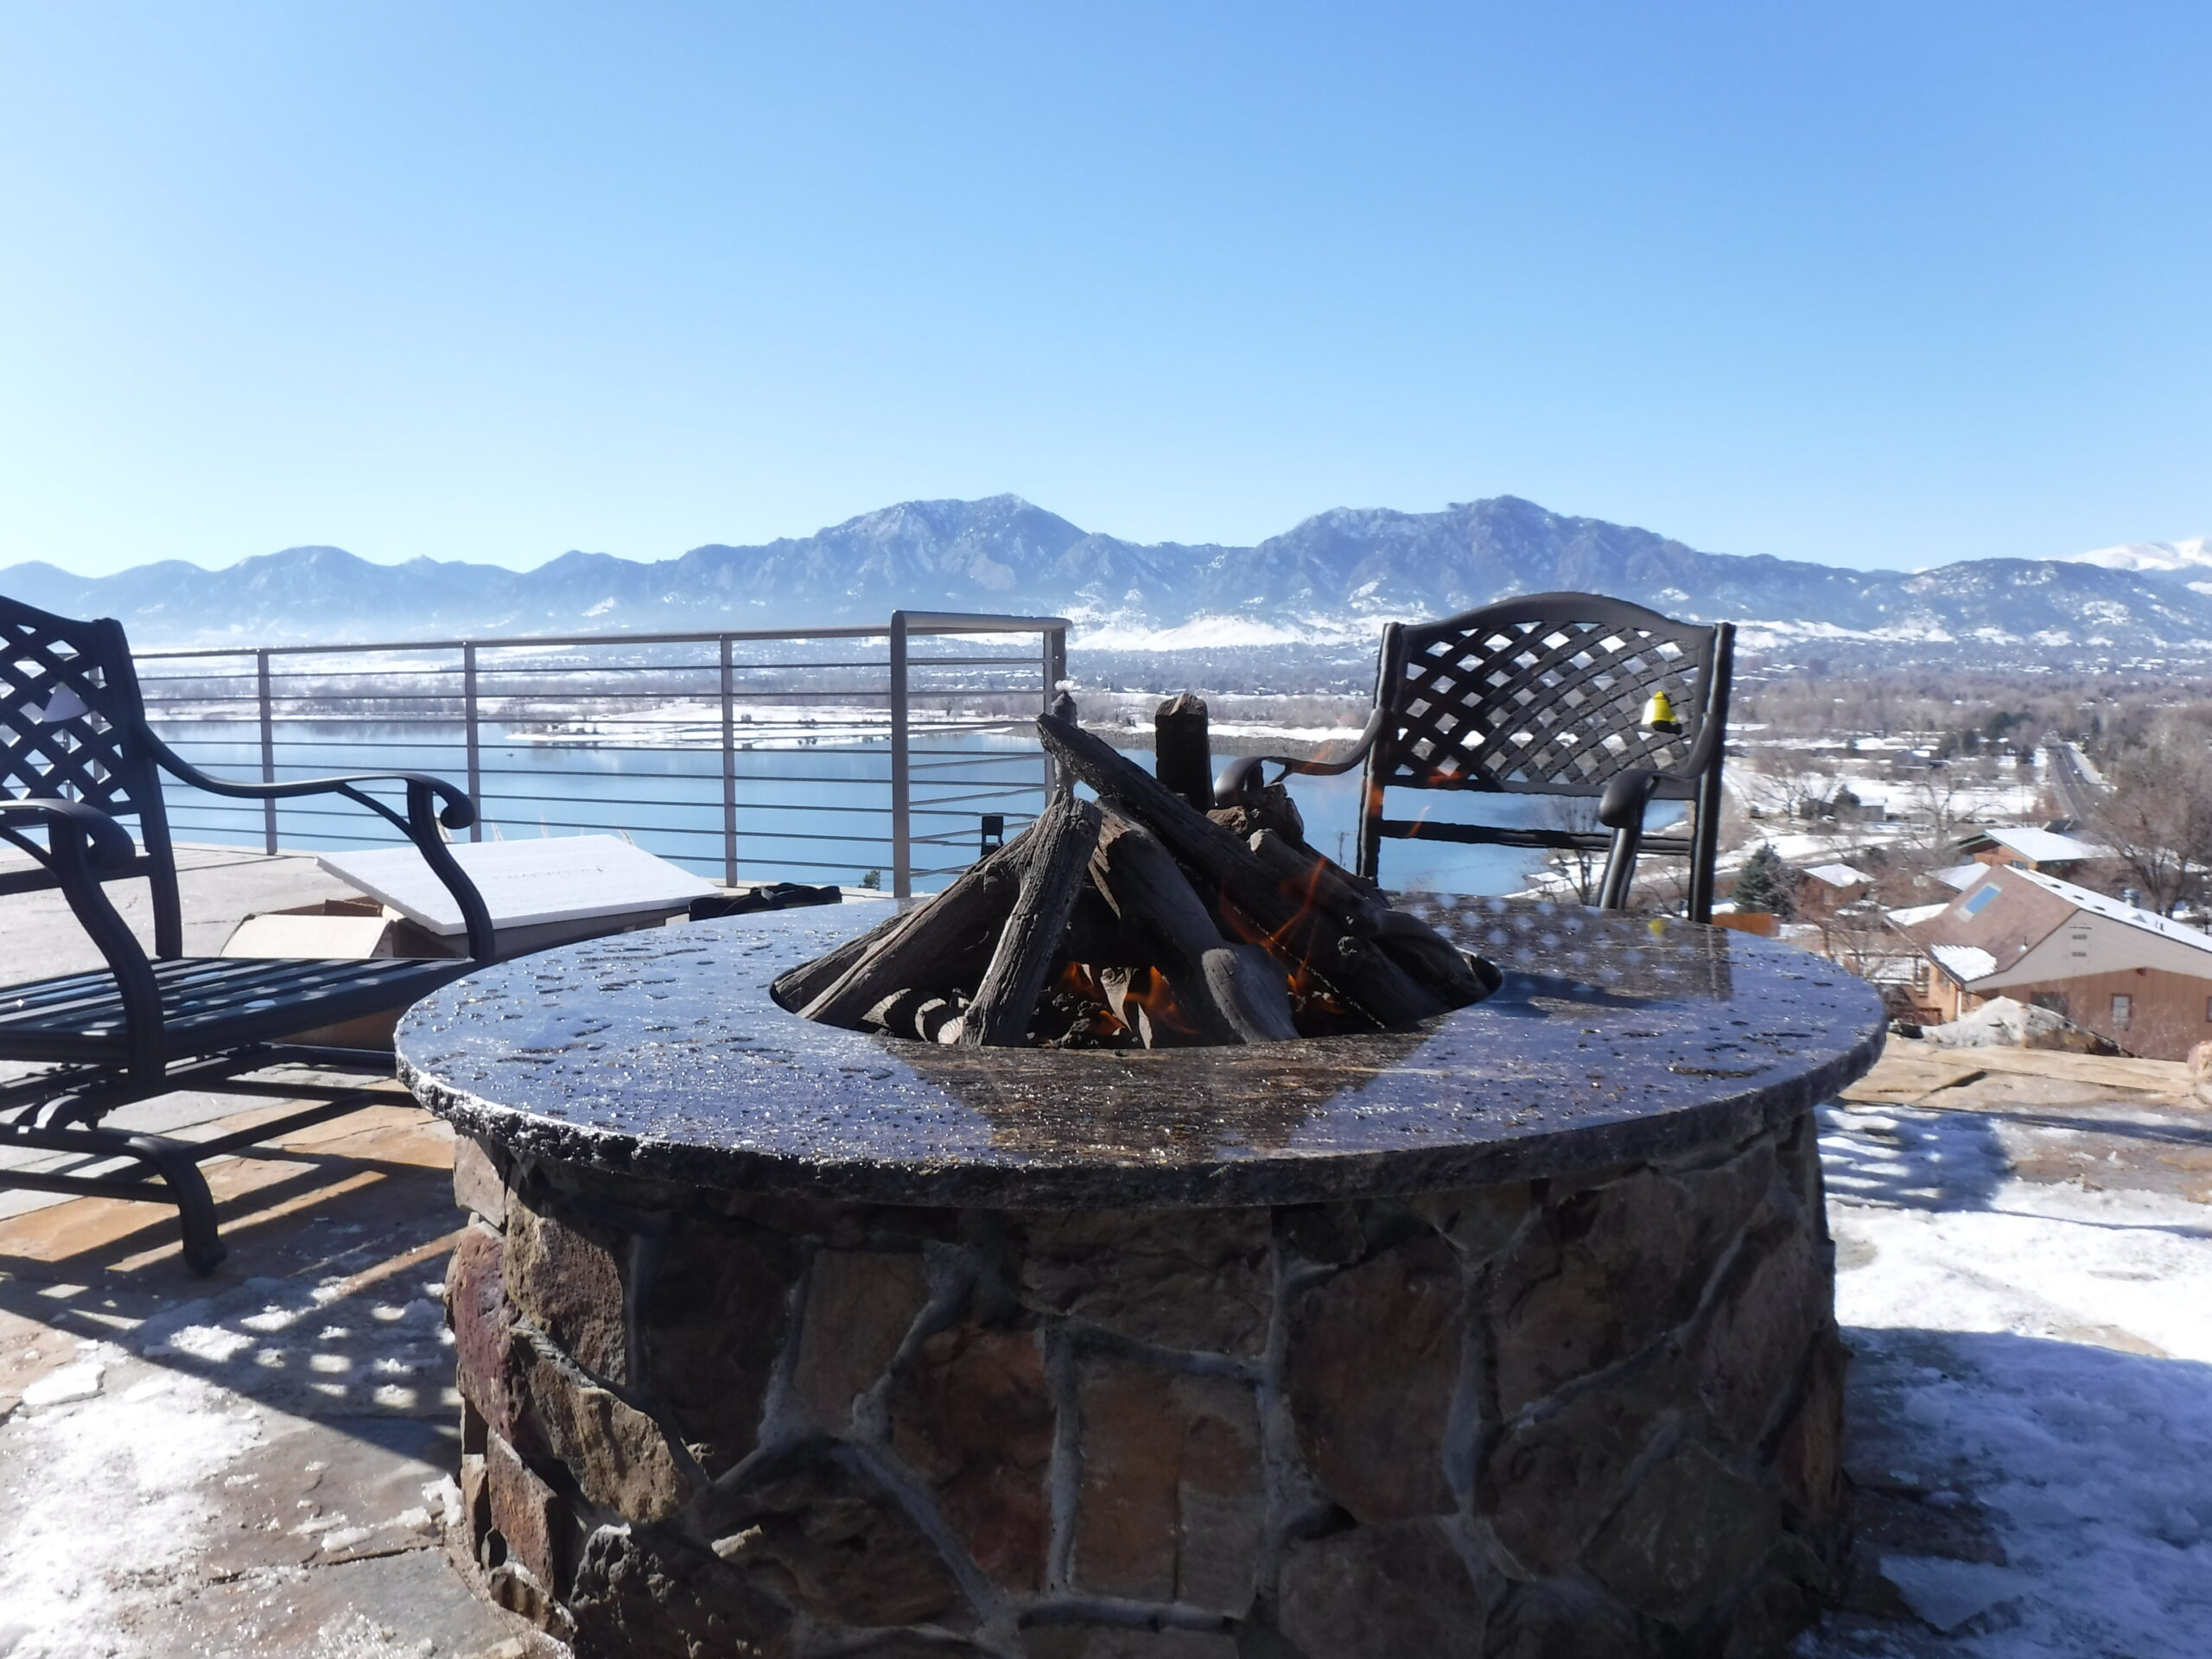 Firepit With a View of The Mountains